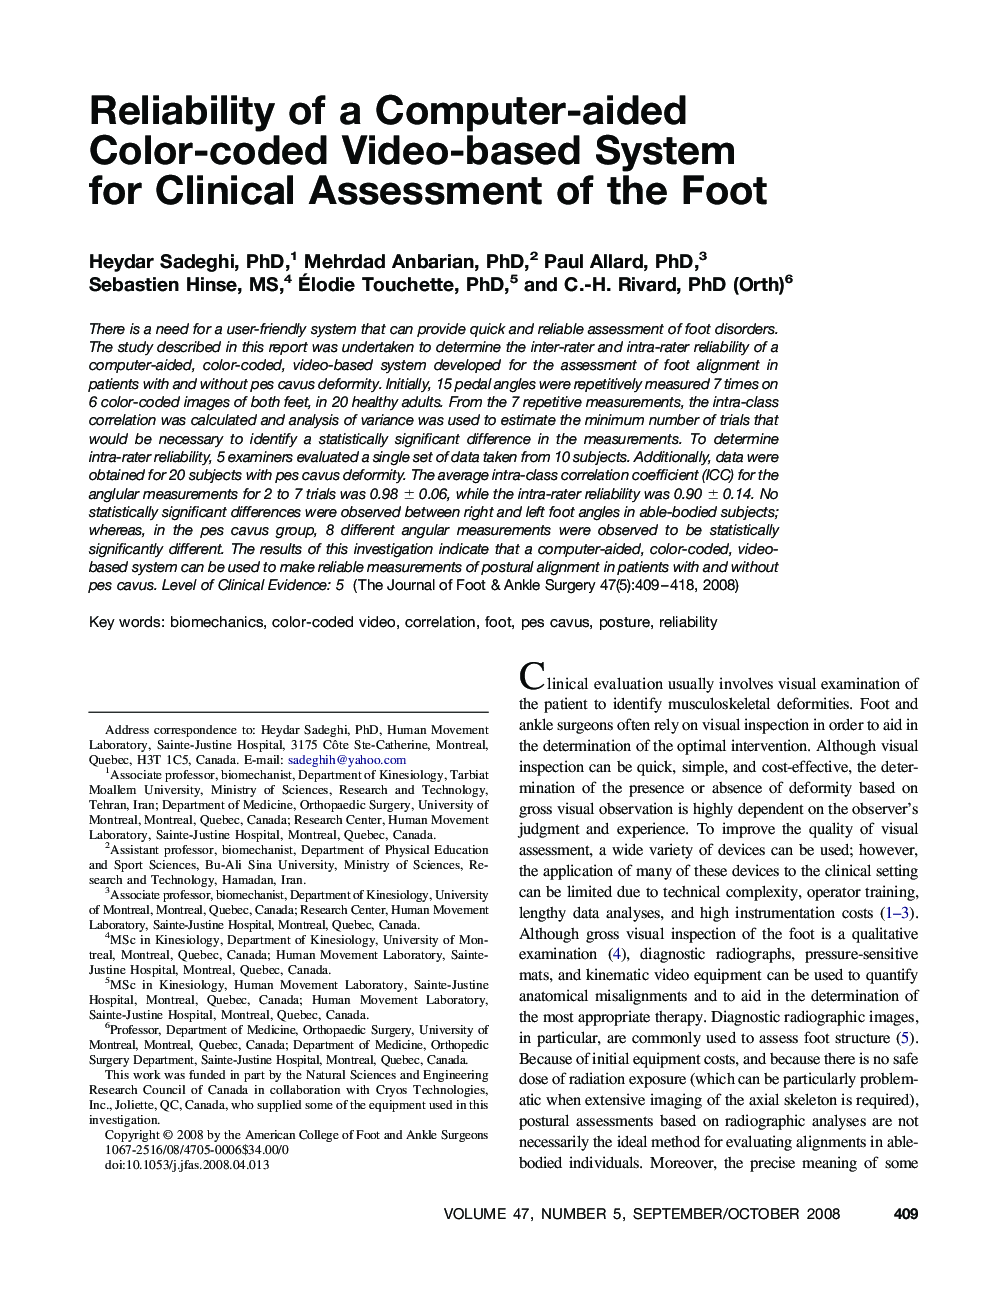 Reliability of a Computer-aided Color-coded Video-based System for Clinical Assessment of the Foot